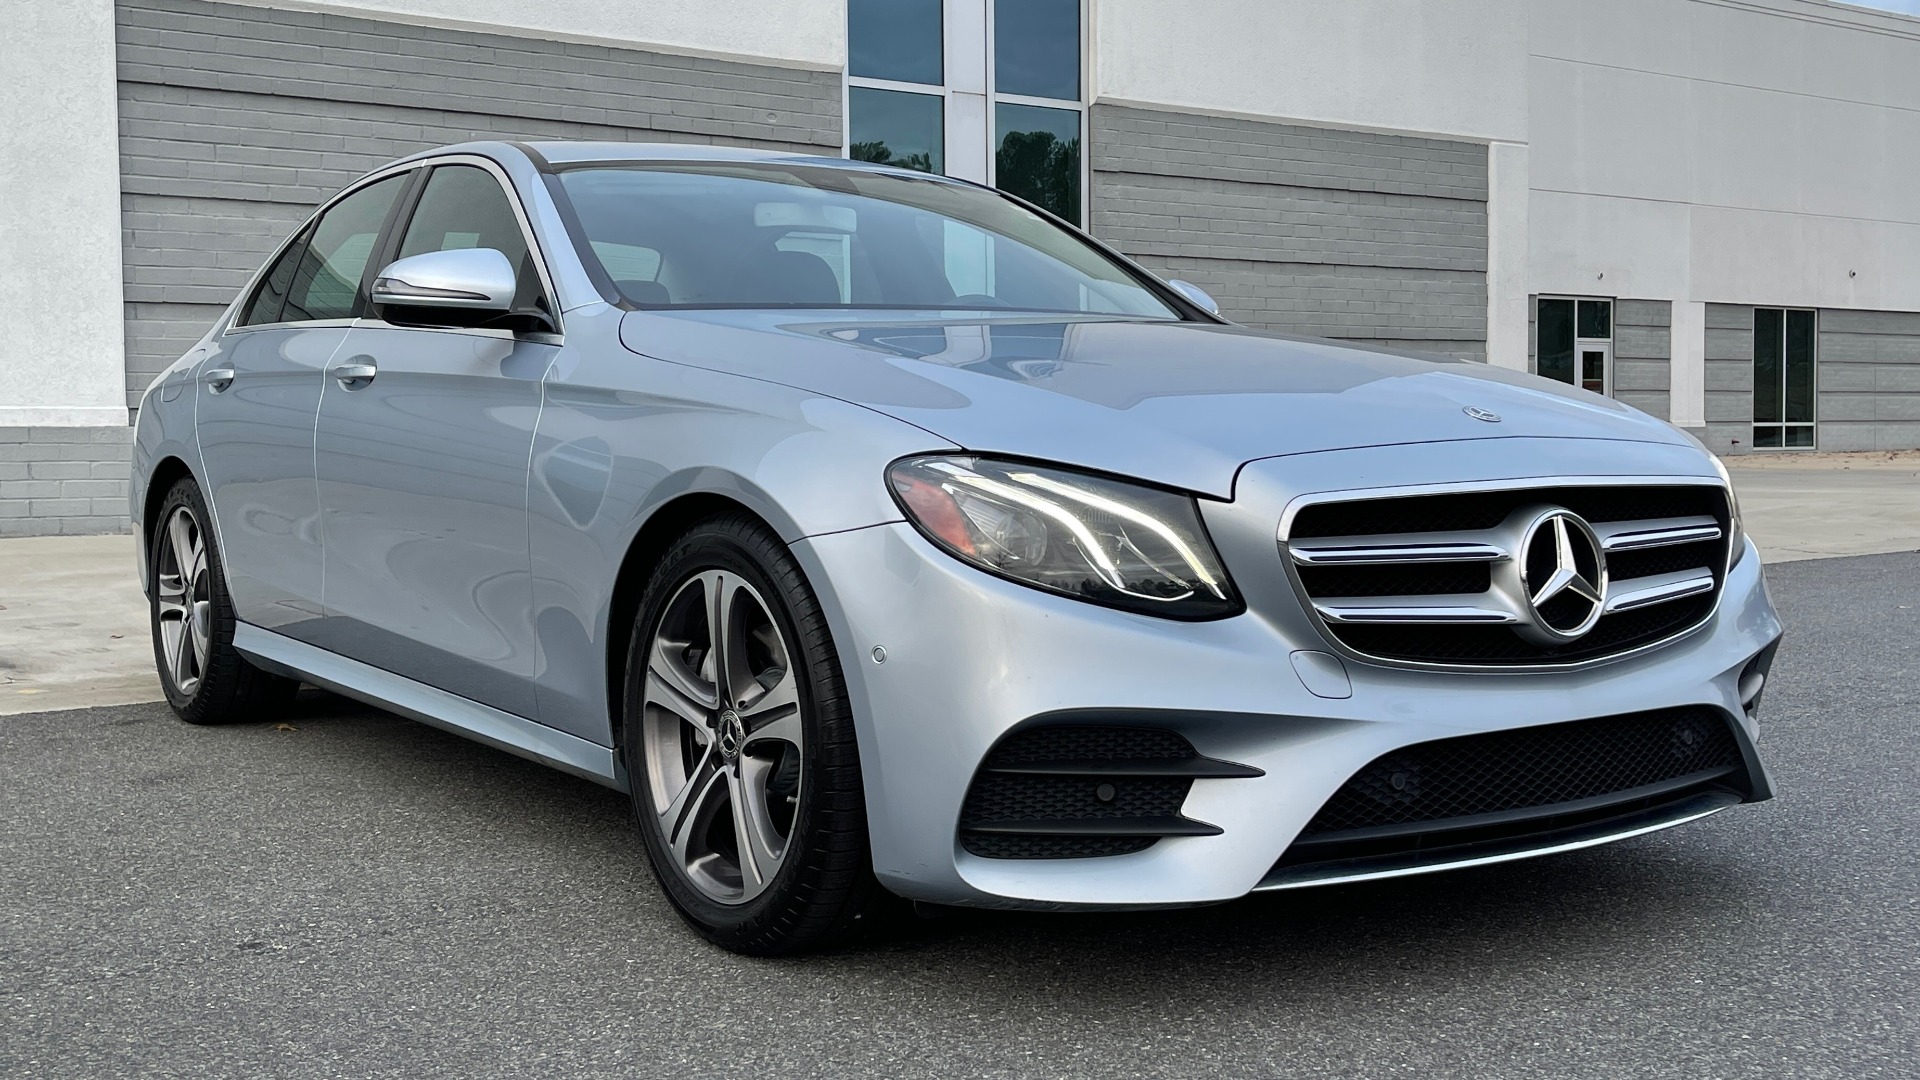 Used 2018 Mercedes-Benz E-CLASS E 300 PREMIUM / NAV / SUNROOF / BURMESTER / PARK ASST / REARVIEW for sale Sold at Formula Imports in Charlotte NC 28227 8